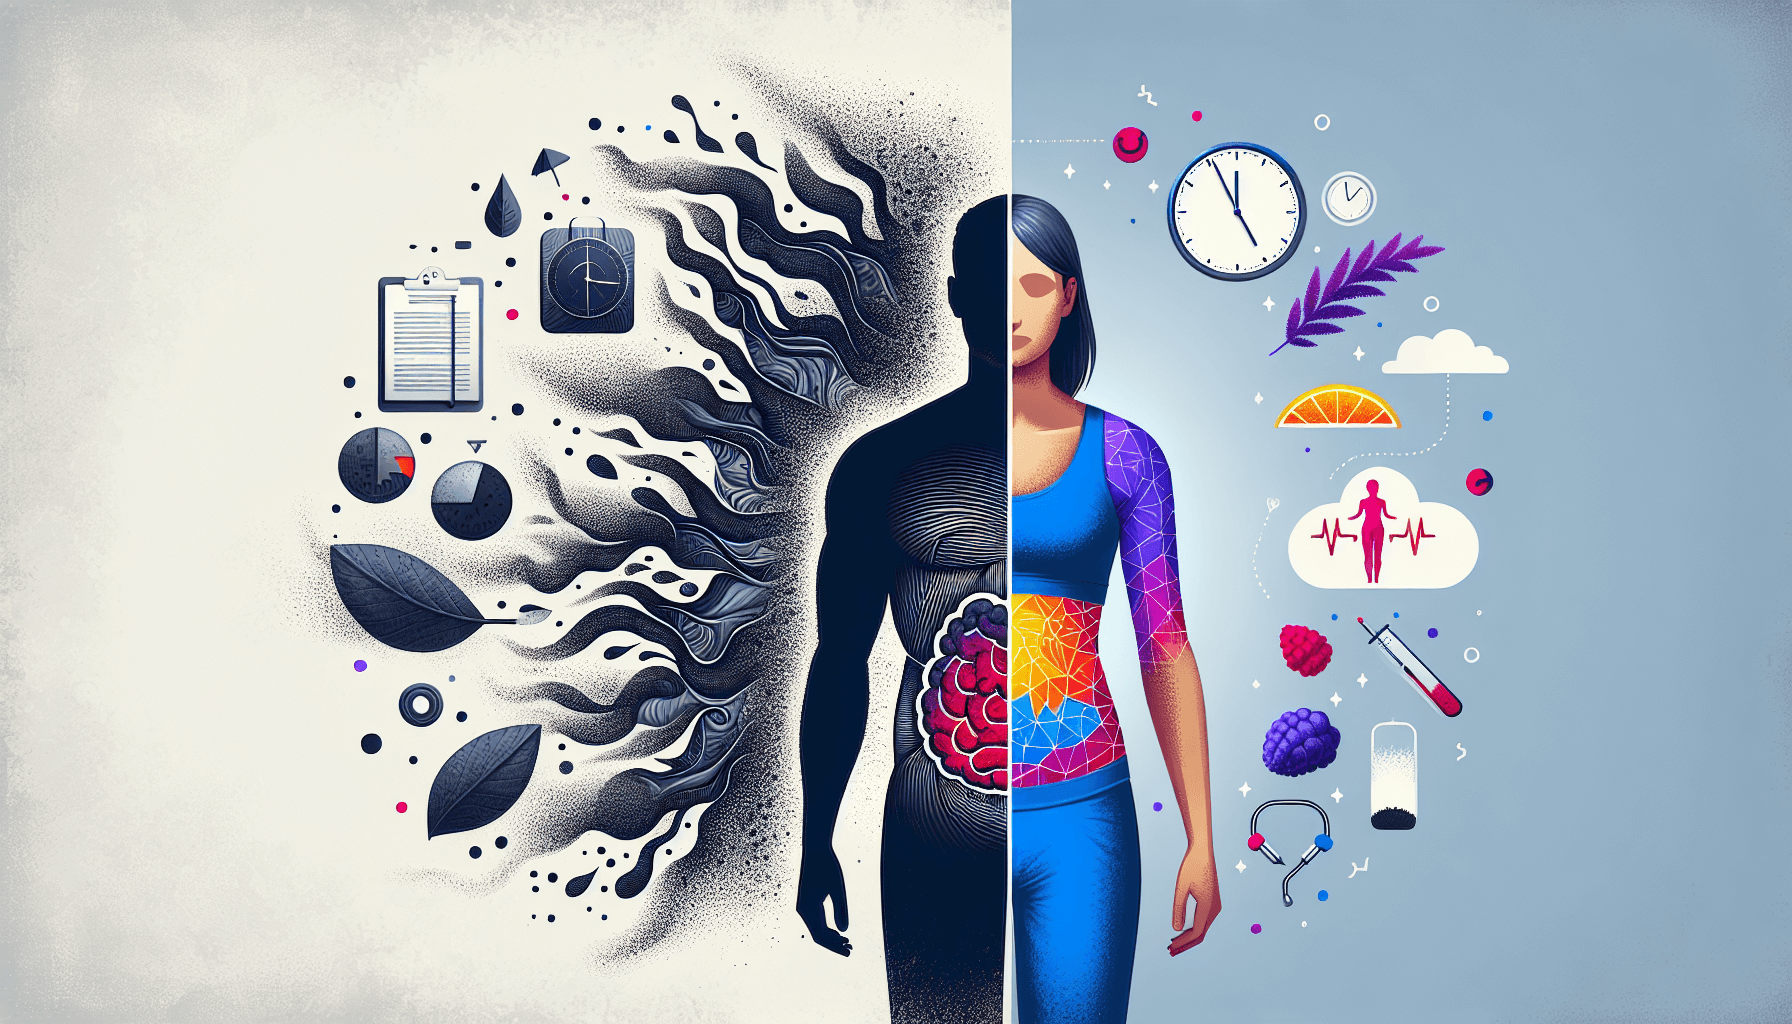 Transformation from stress to health, a visual narrative